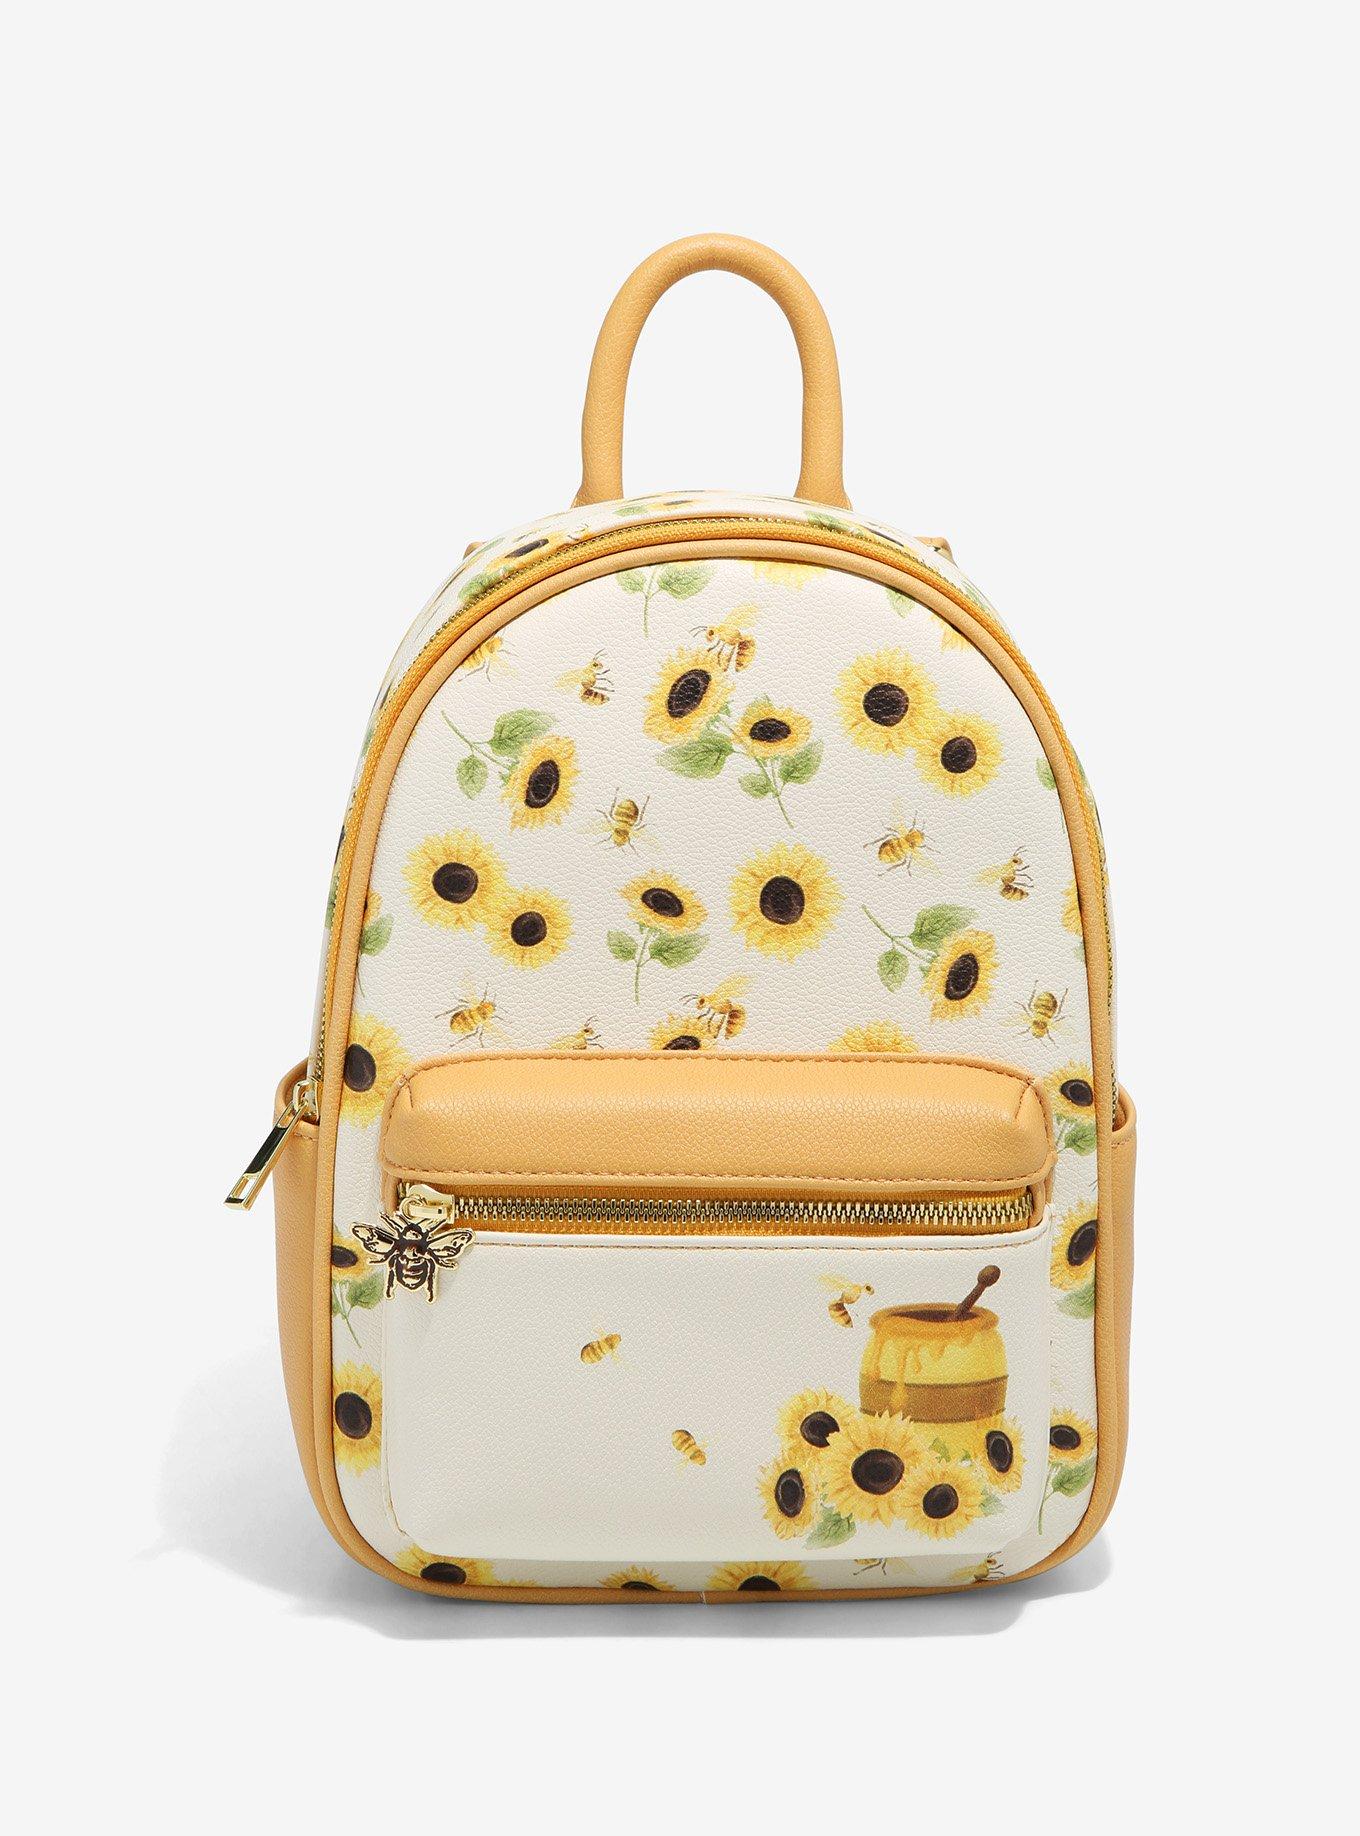 Black Gold Bees Mini Backpack Travel Purse- UnderOneSky-New with Tags